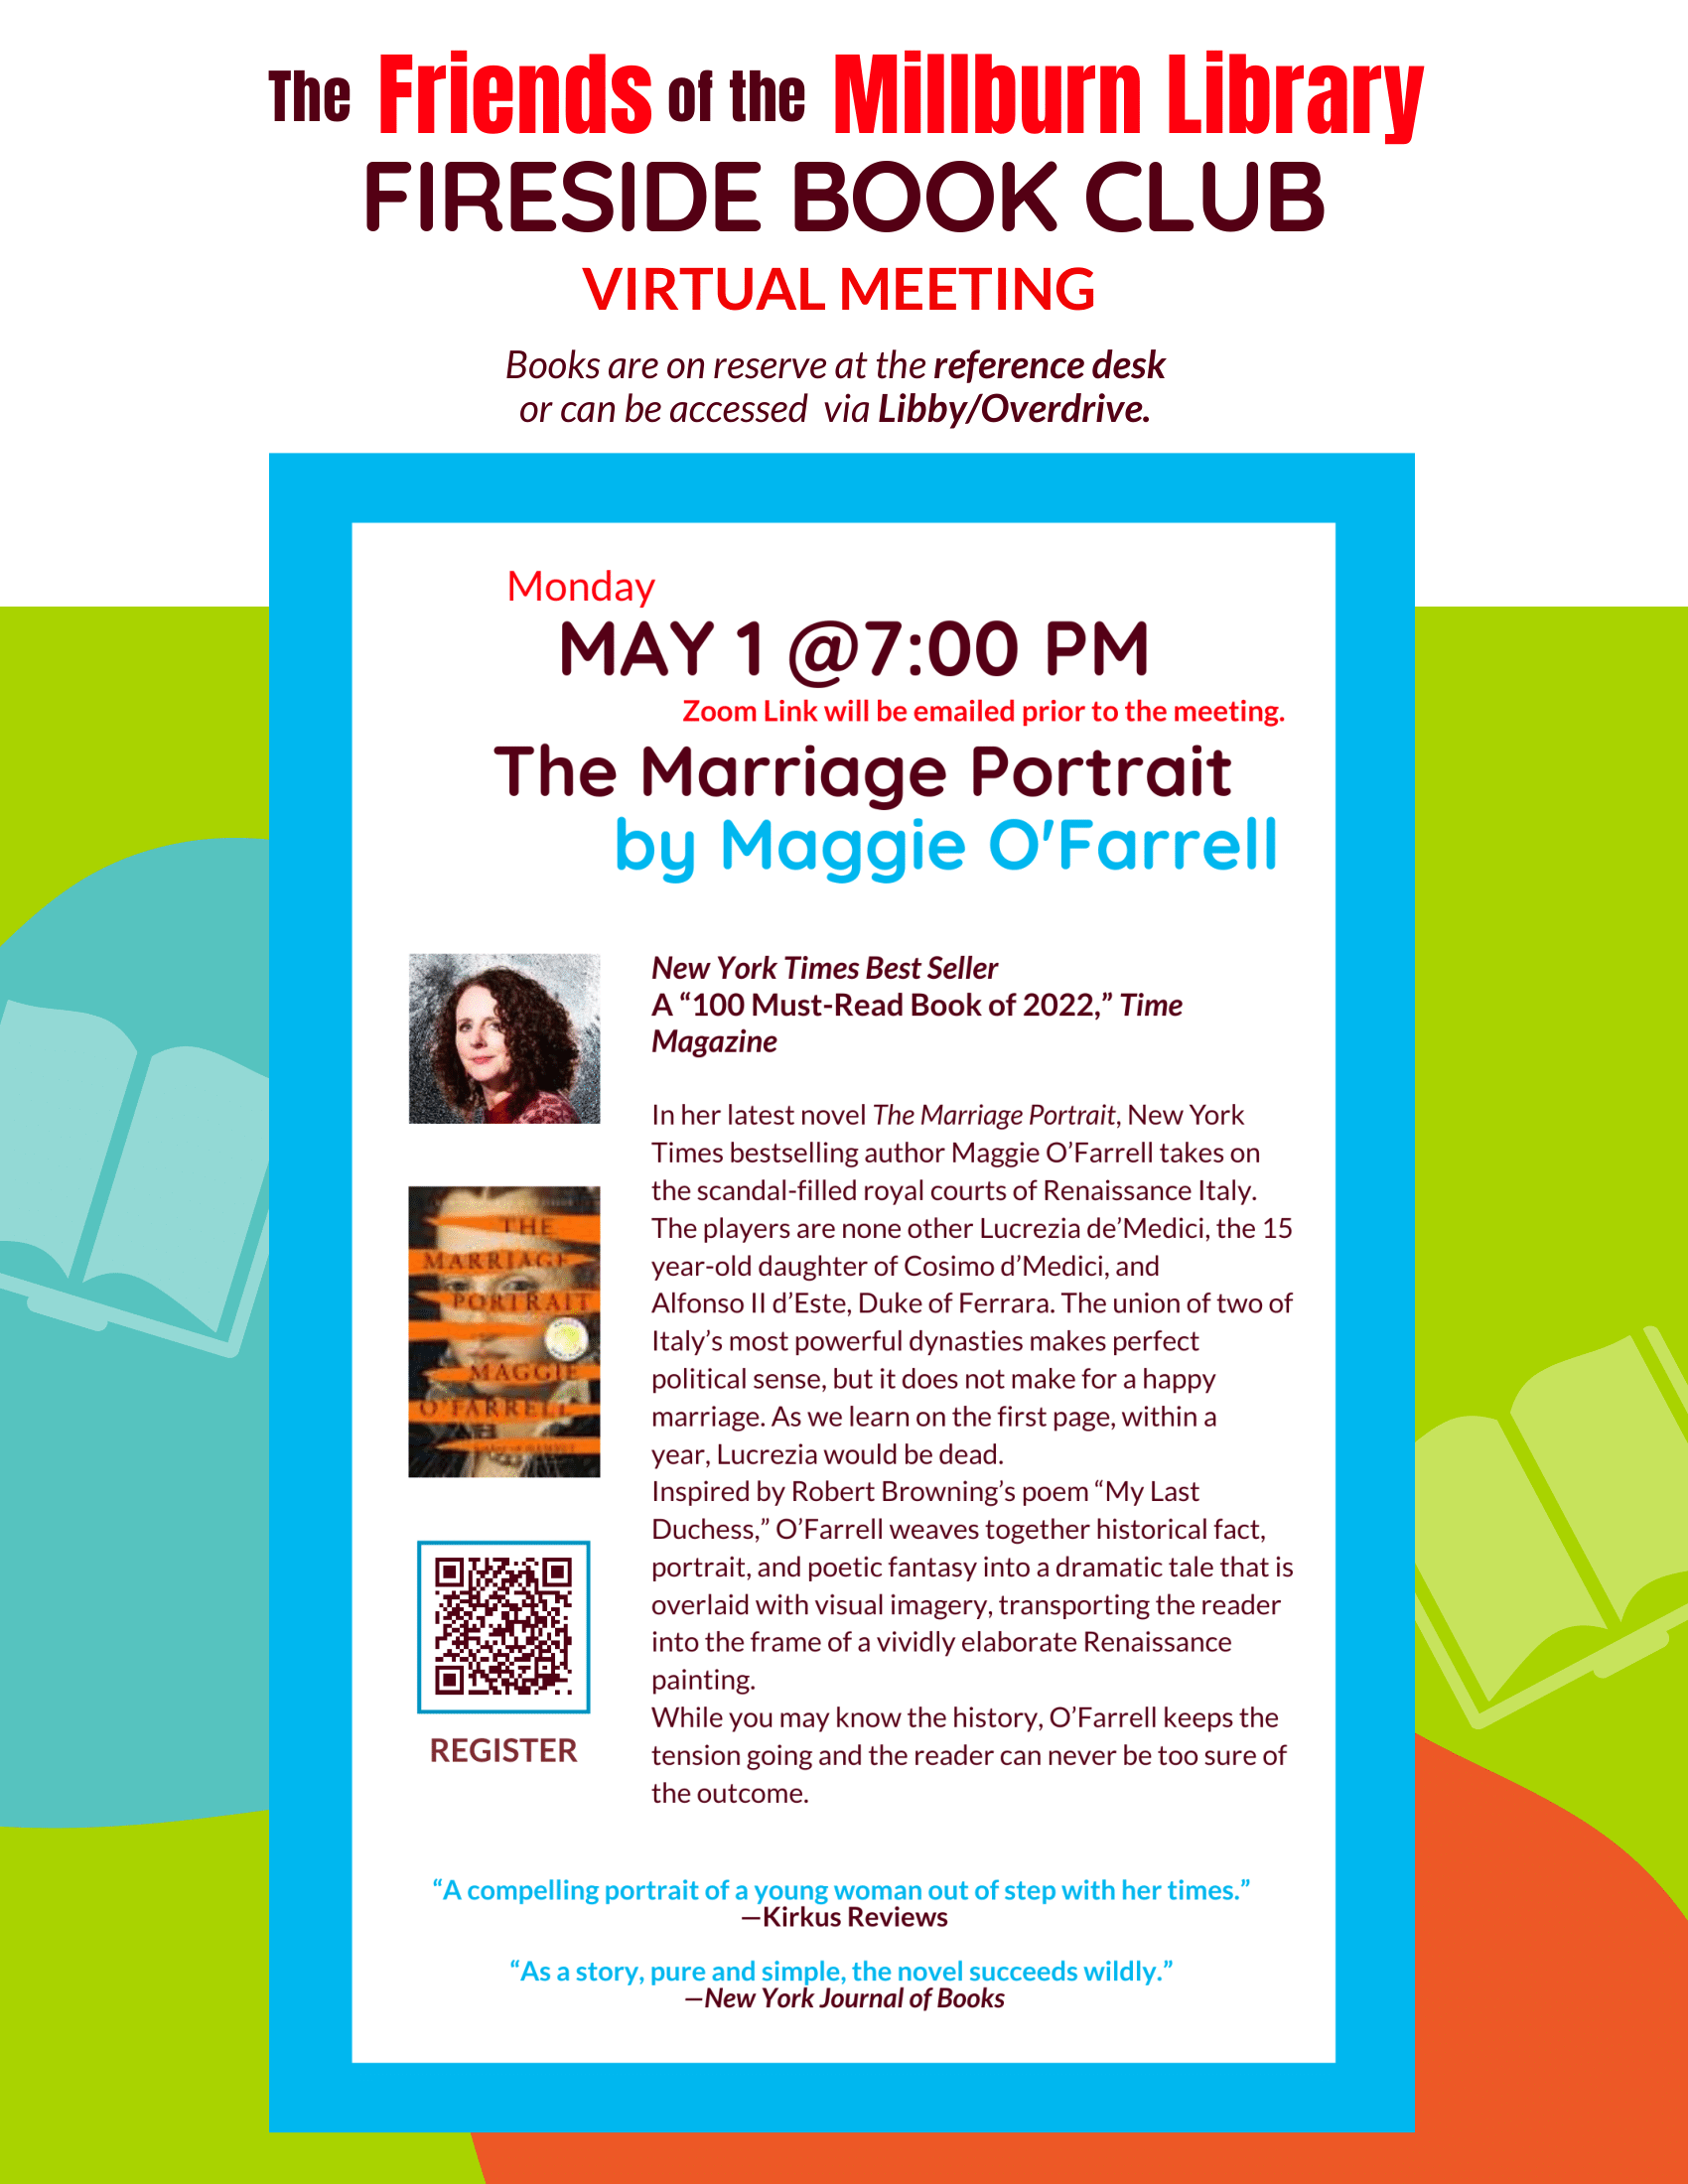 Friends Fireside Book Club. Monday, May 1 @ 7pm via Zoom. The Marriage Portrait, by Maggie O-Farrell. Sign on the Library's Events calendar to receive the Zoom link prior to the virtual meeting.